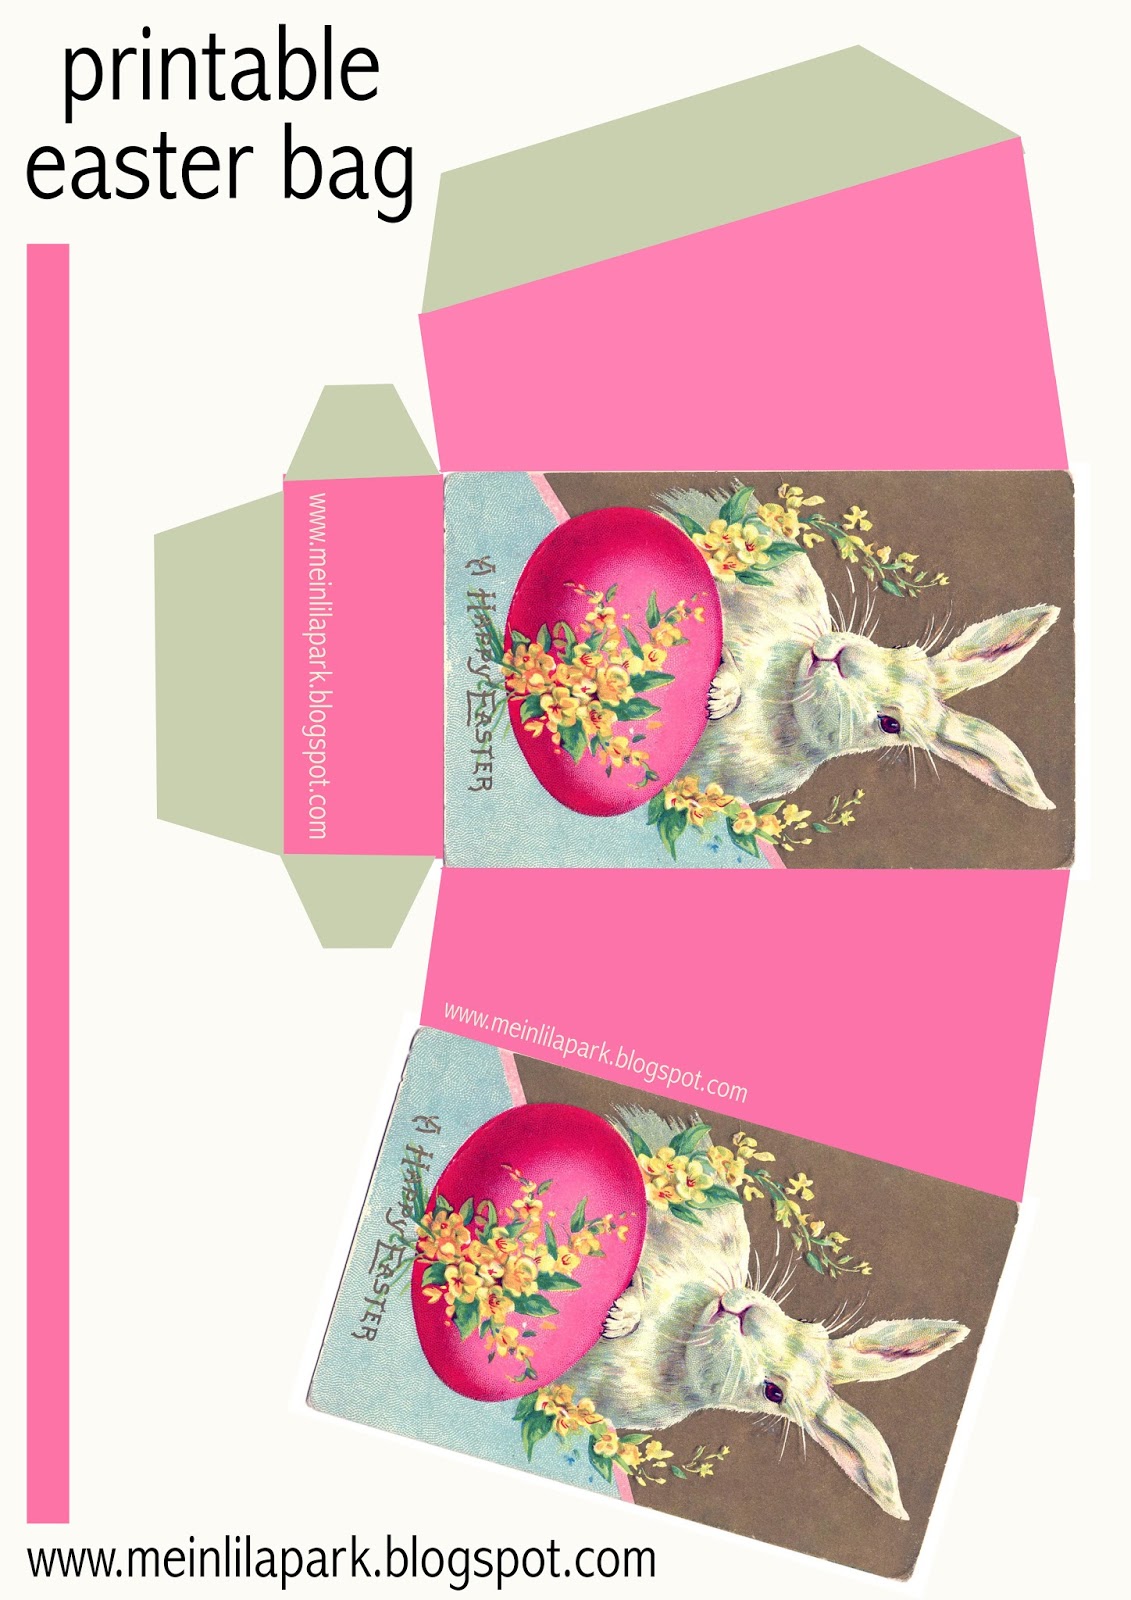 free-templates-for-easter-eggs-printable-templates